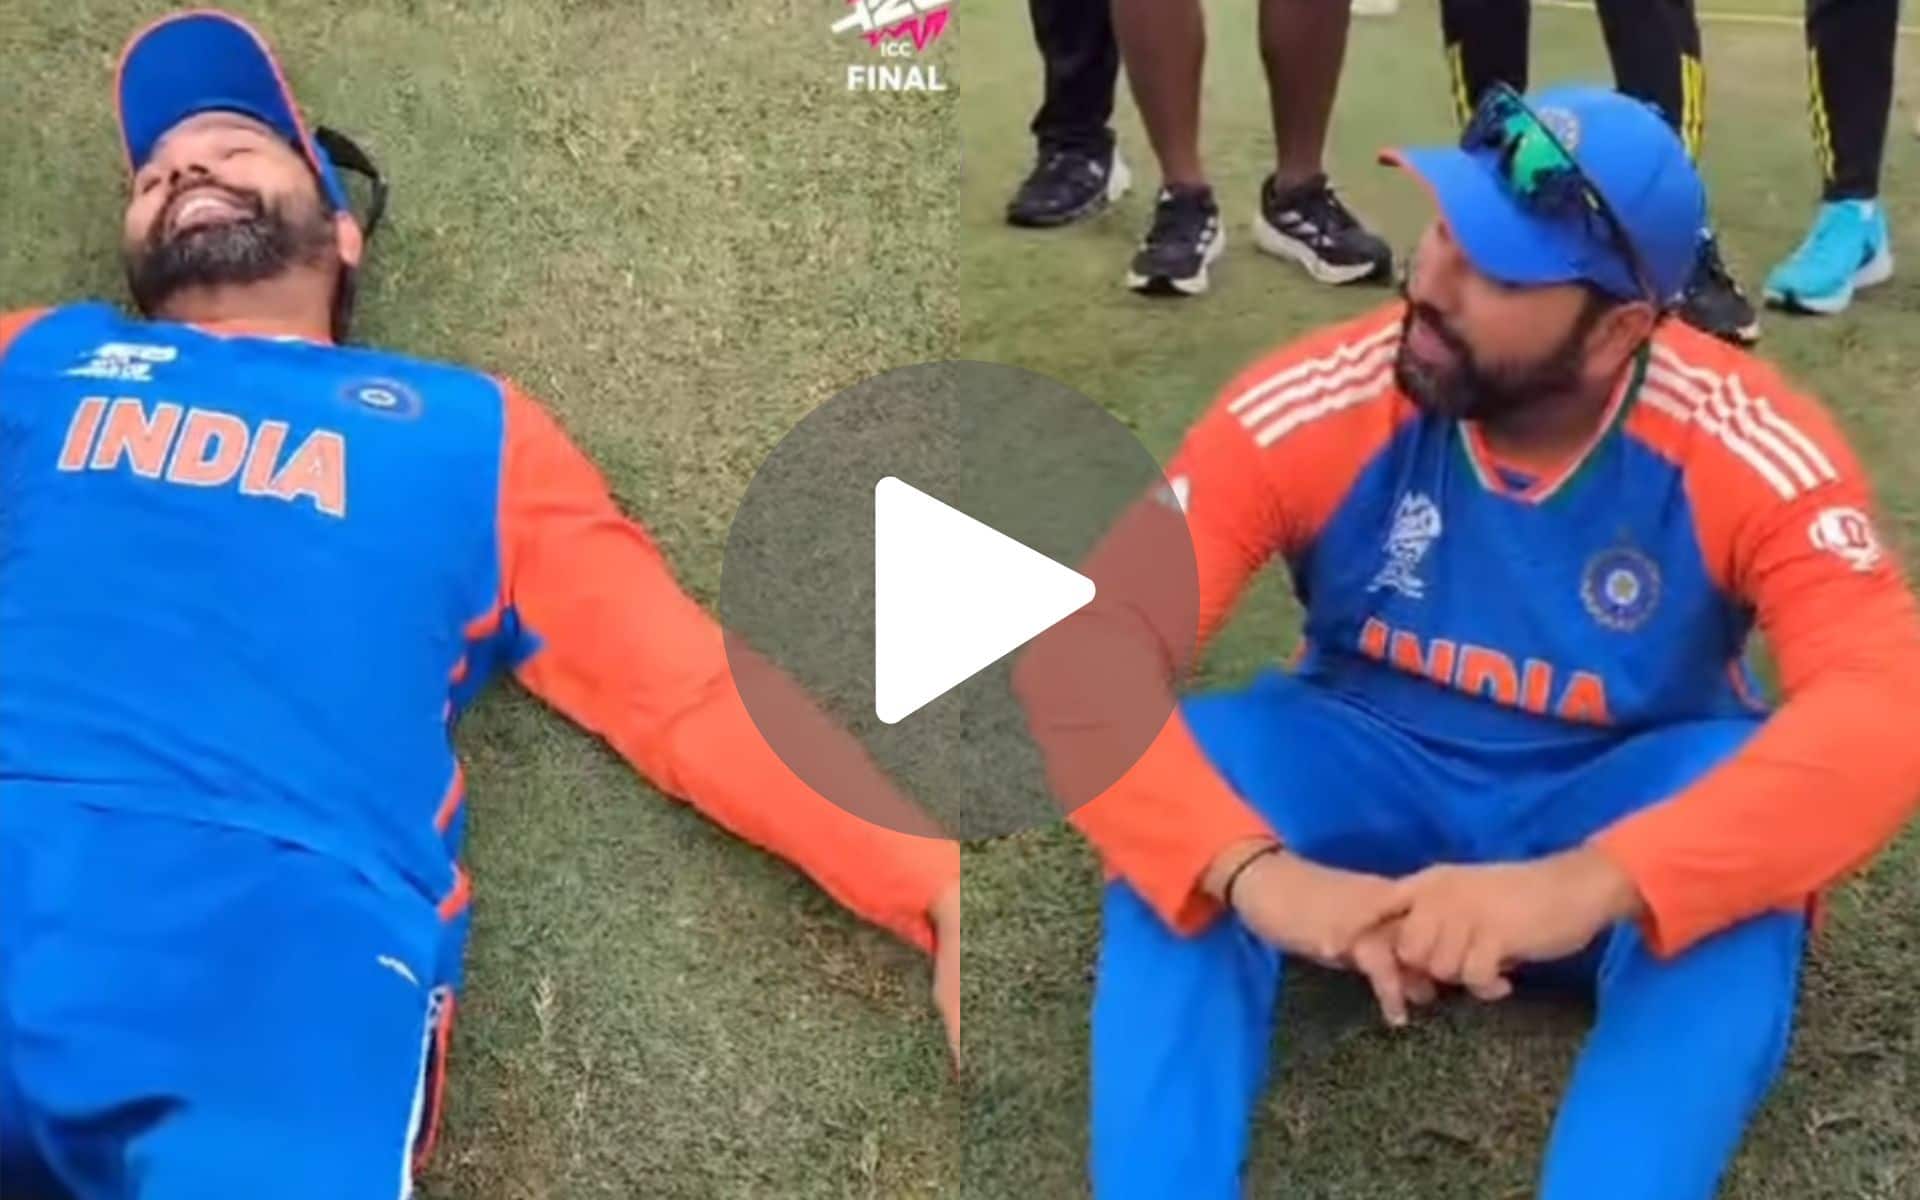 [Watch] Rohit Sharma Lies On The Ground In A 'Dreamy' Experience After World Cup Win